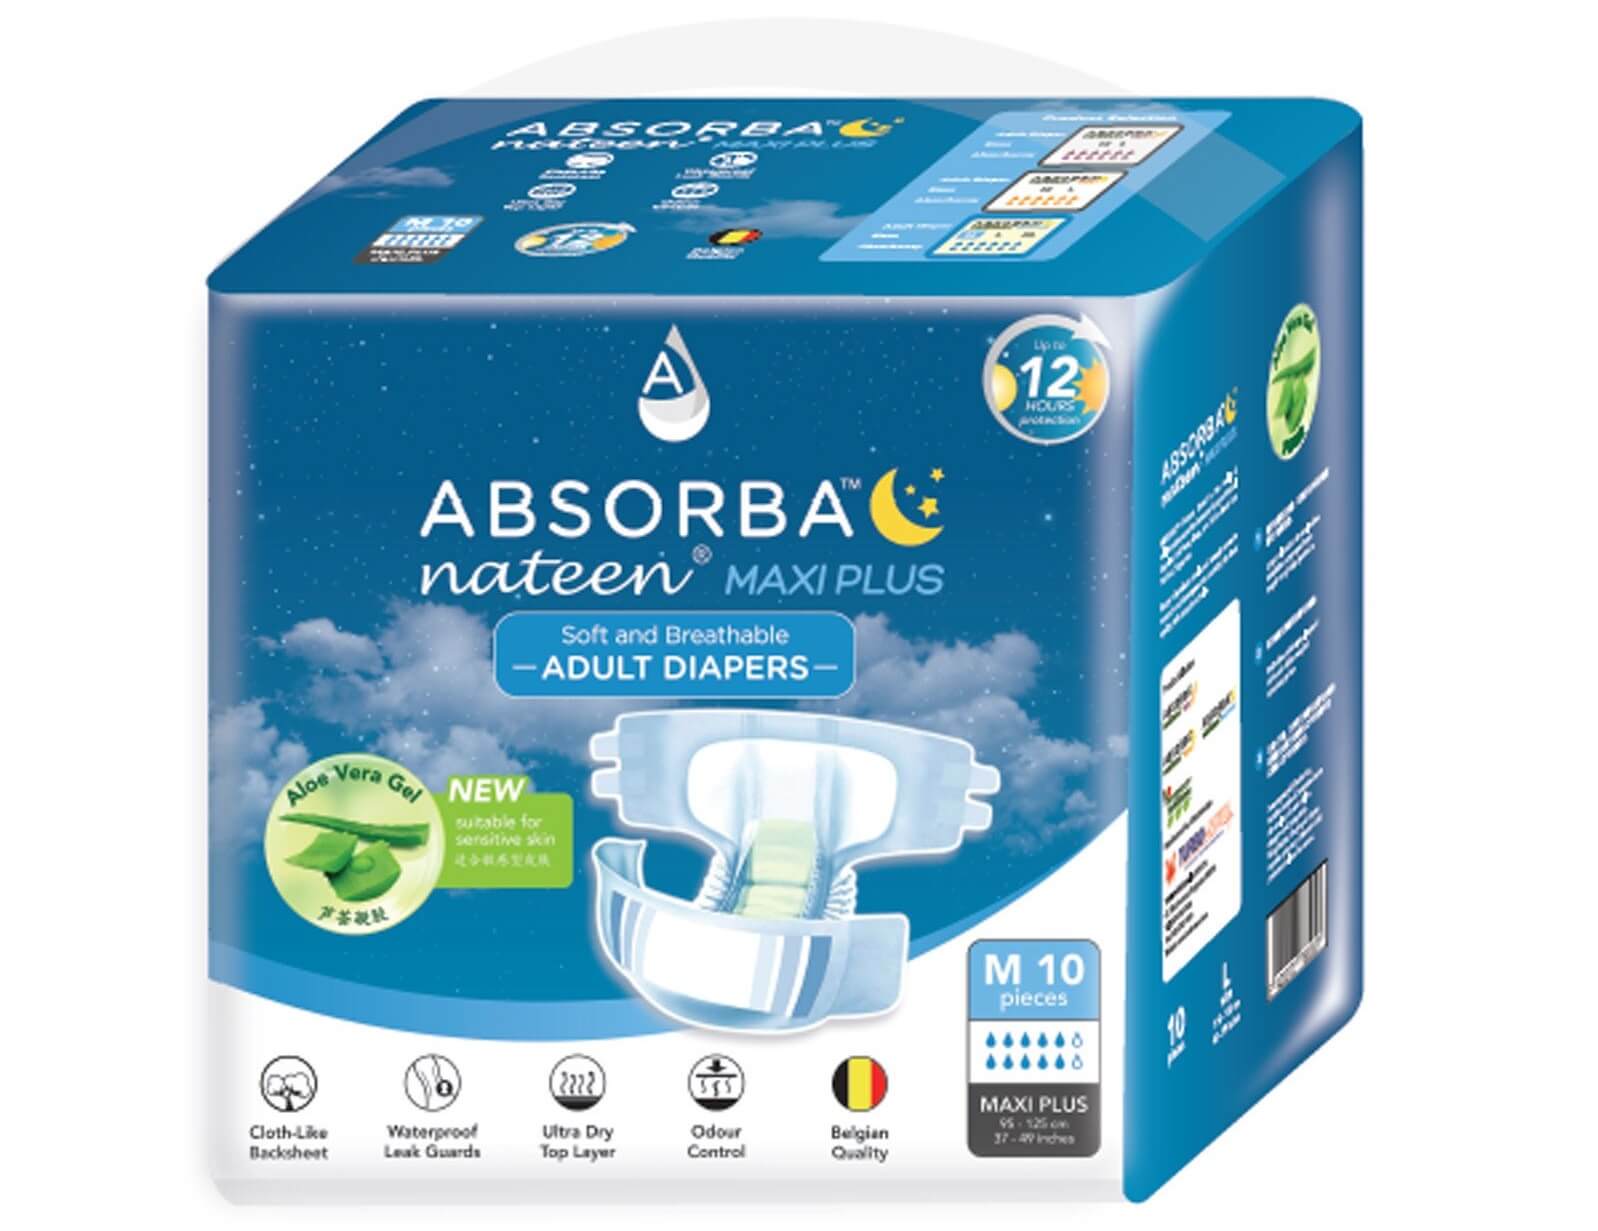 adults diapers Absorba Nateen